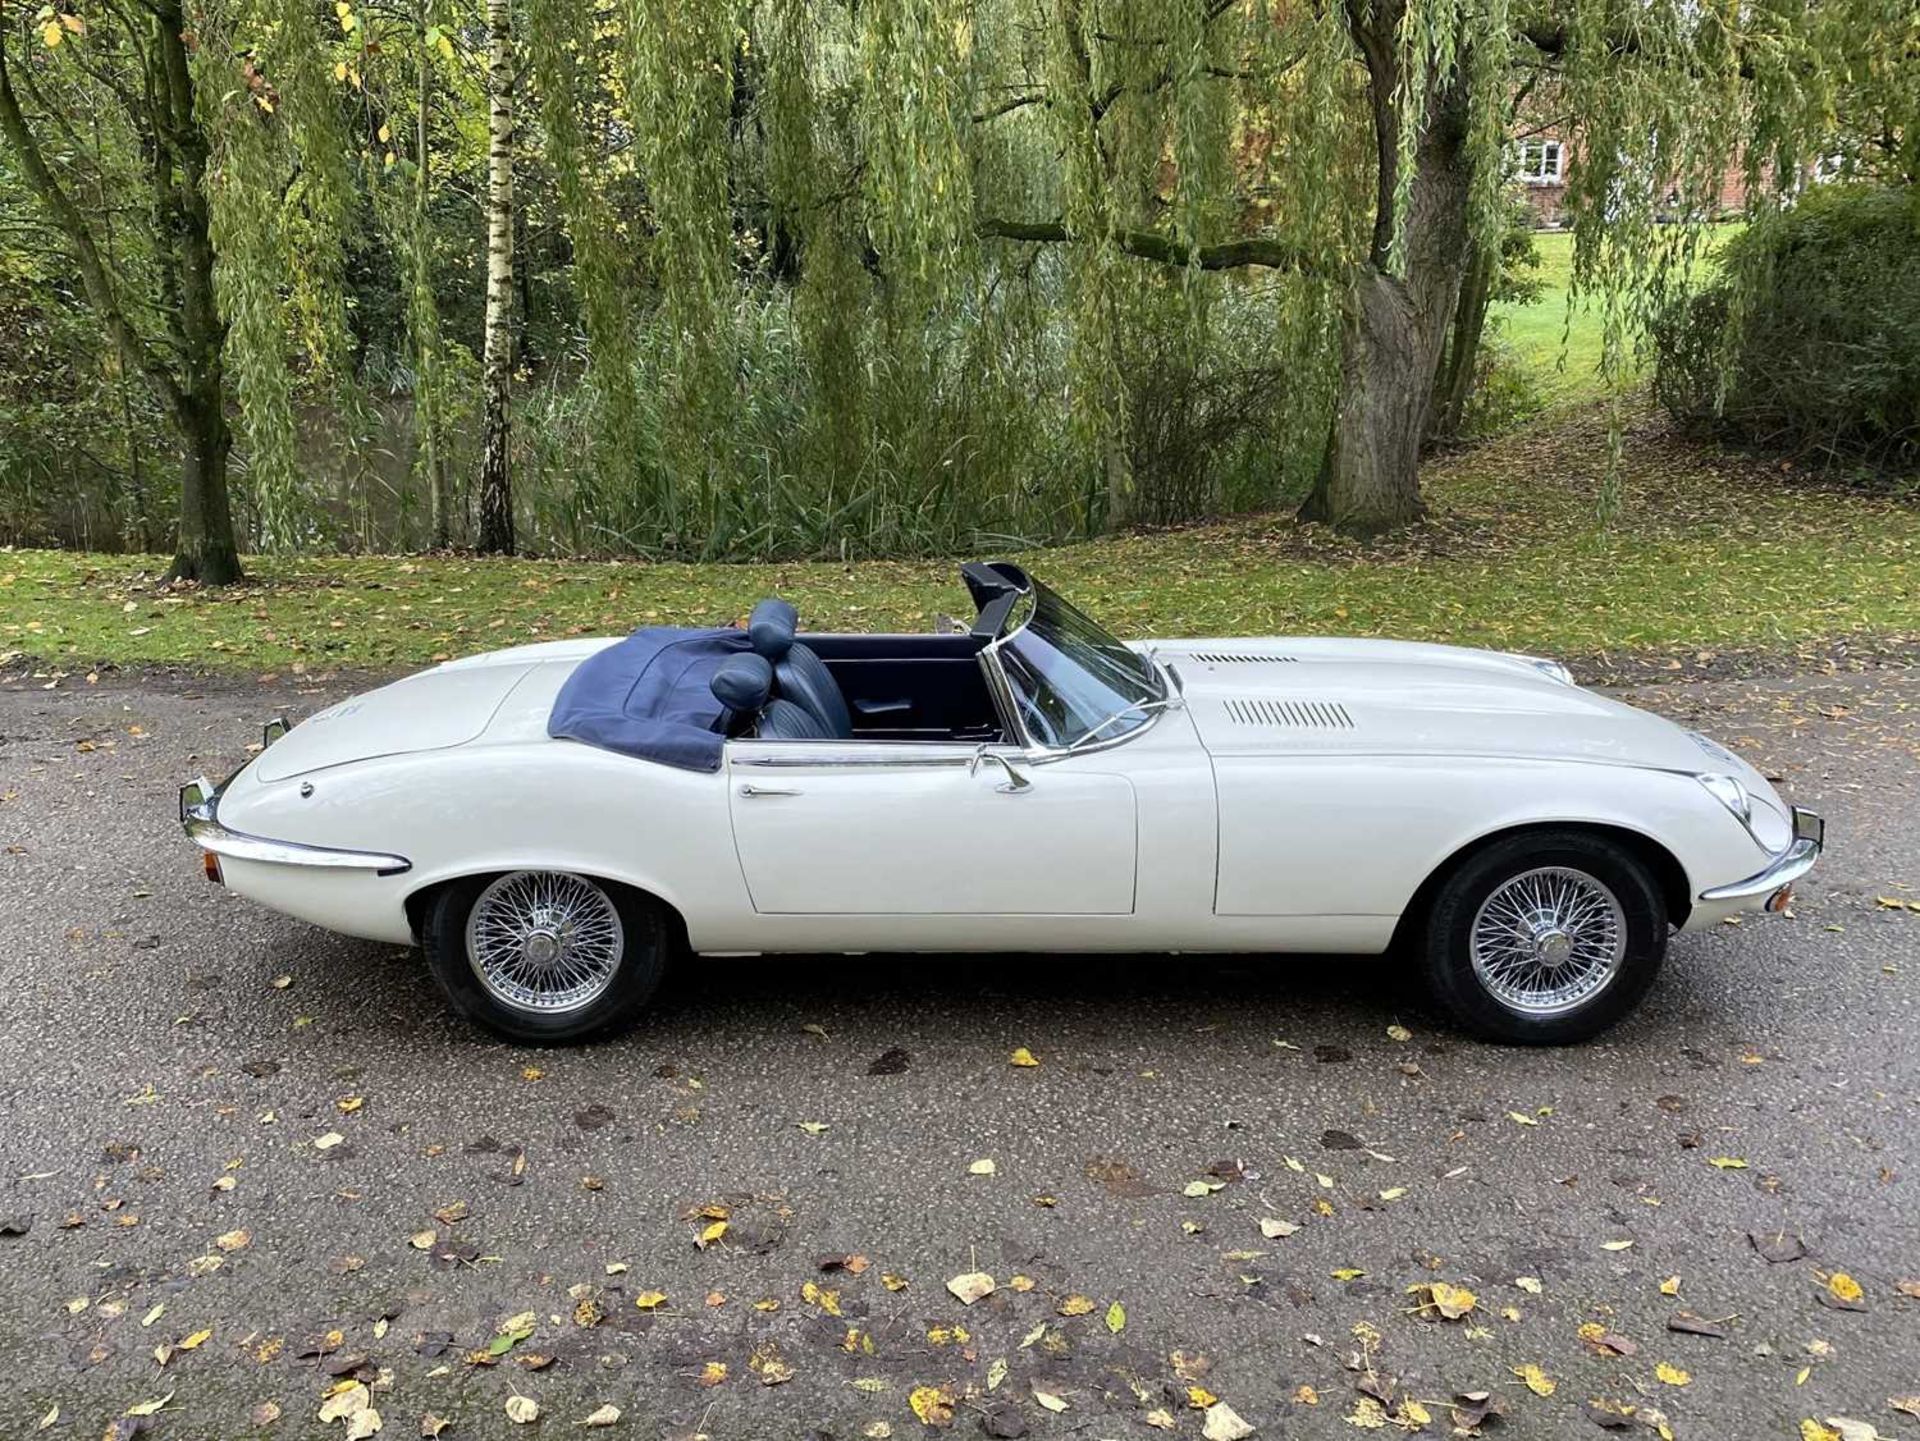 1973 Jaguar E-Type V12 Roadster As seen in Only Fools and Horses - Image 21 of 105